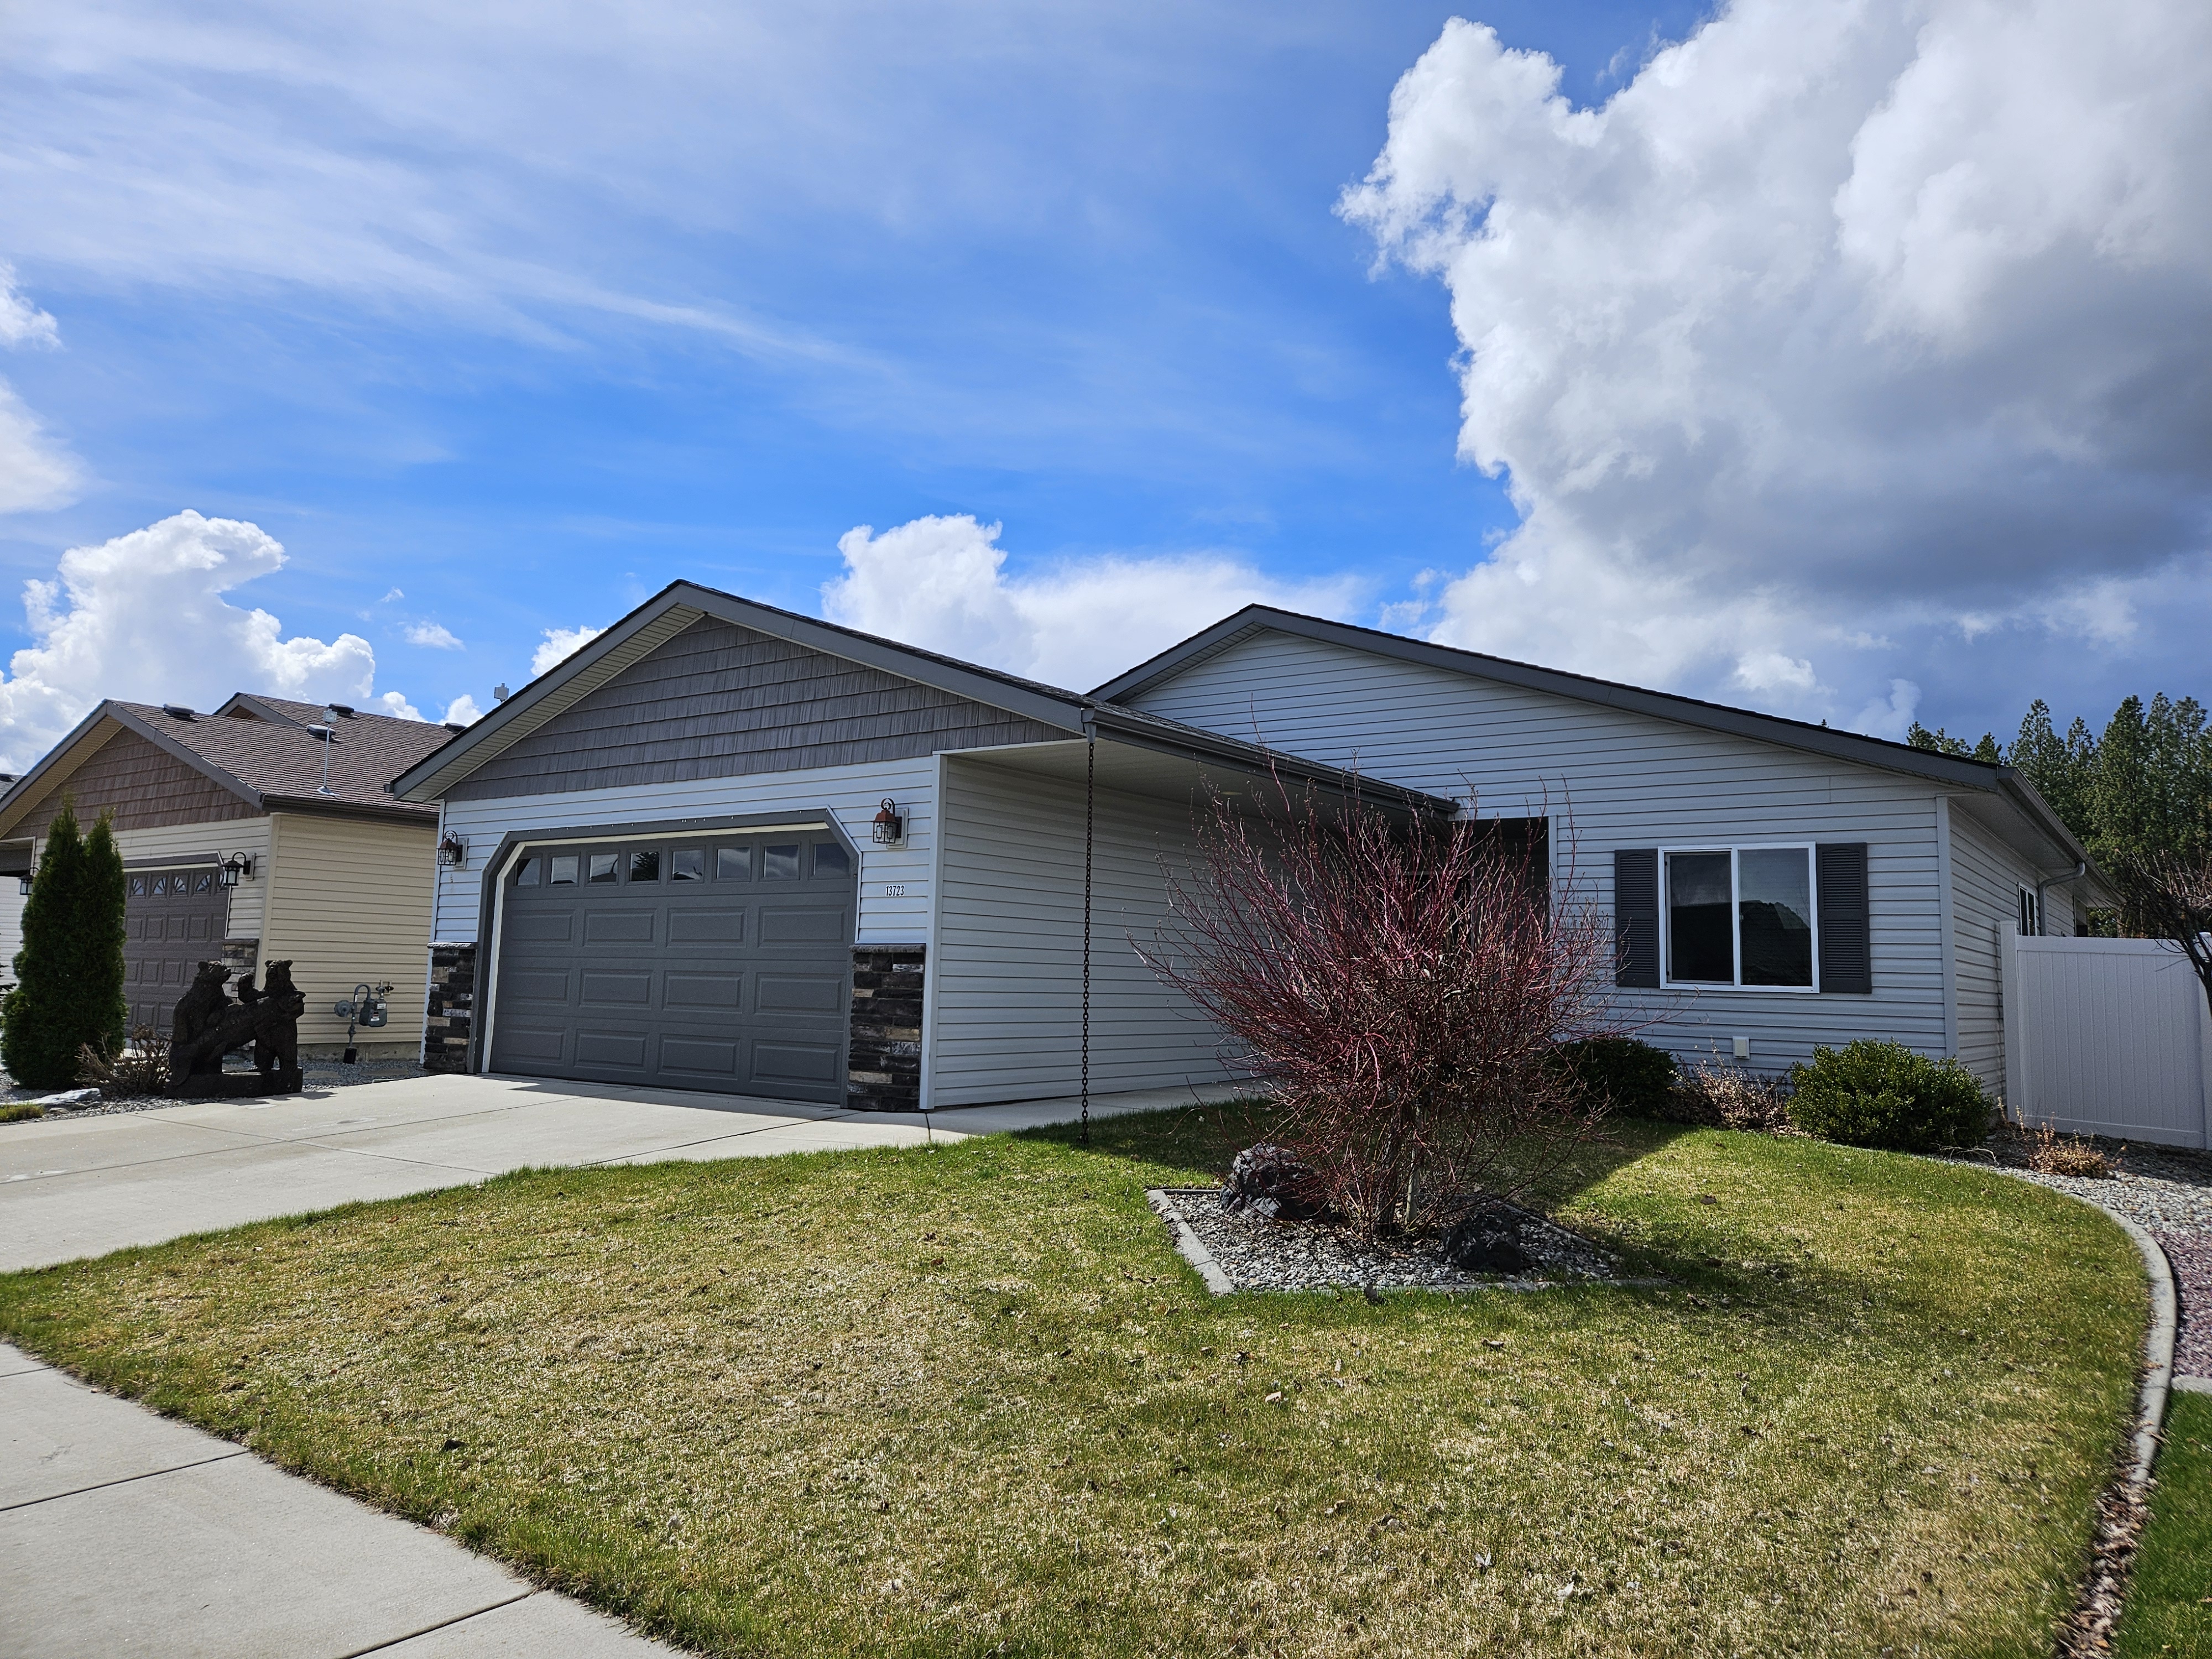 Grand Canyon St, Rathdrum, ID 83858